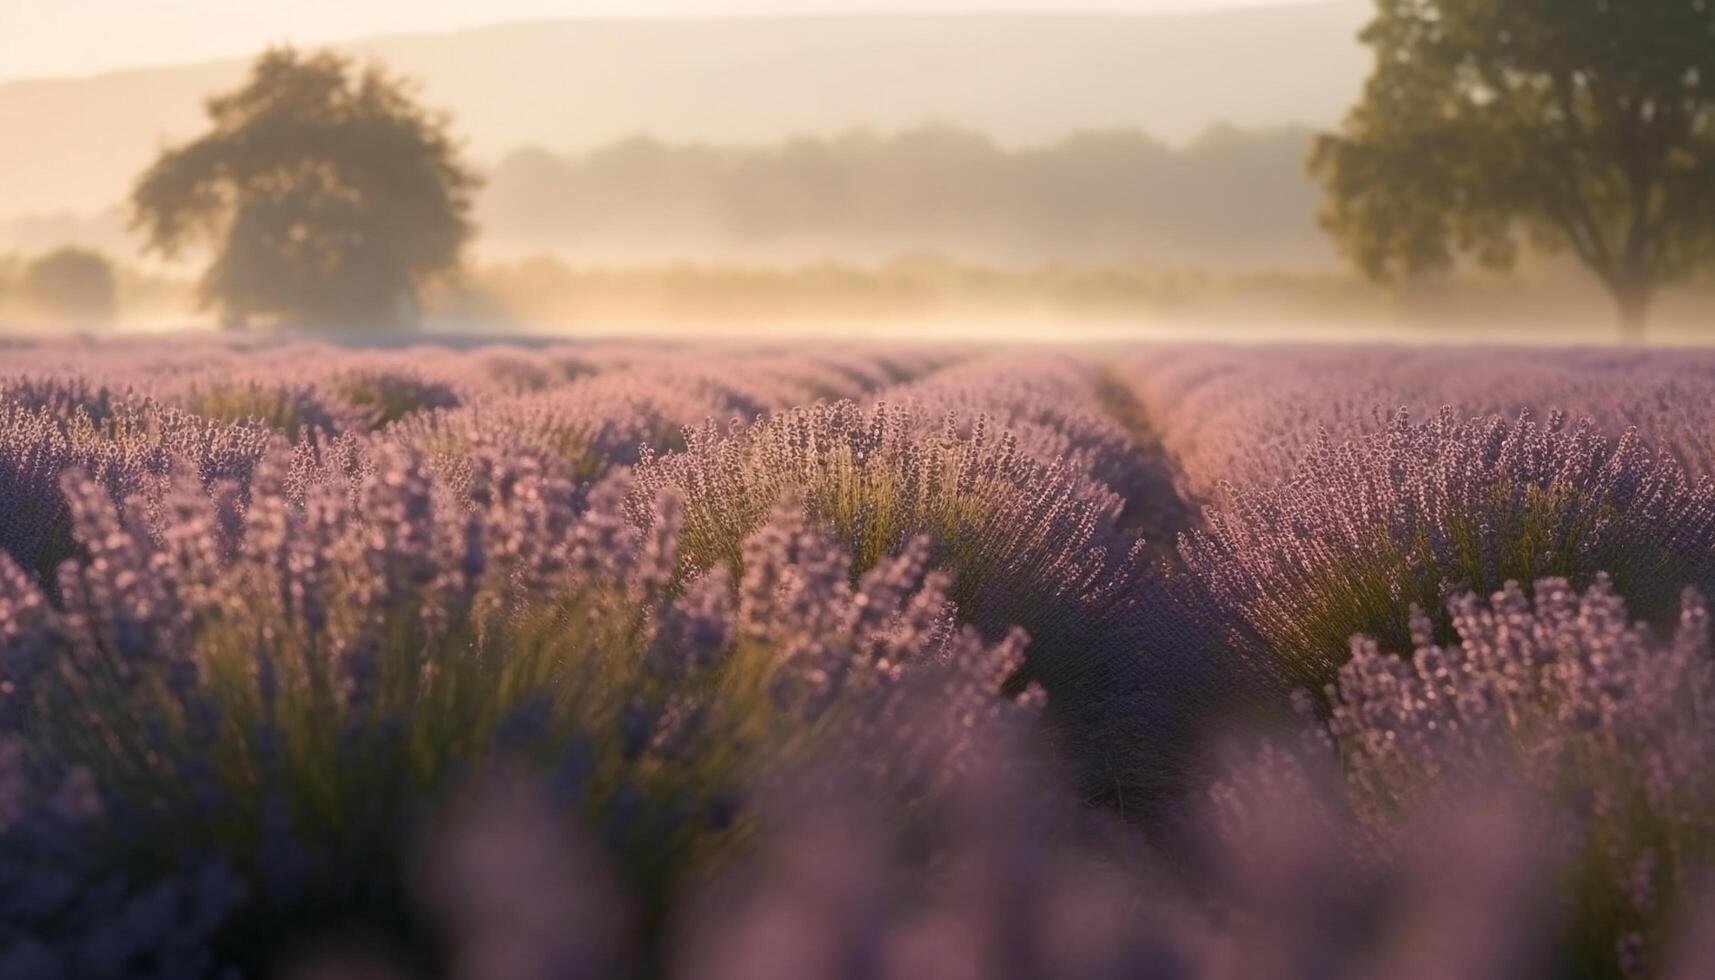 The tranquil scene of Plateau de Valensole offers scented harvests generated by AI photo